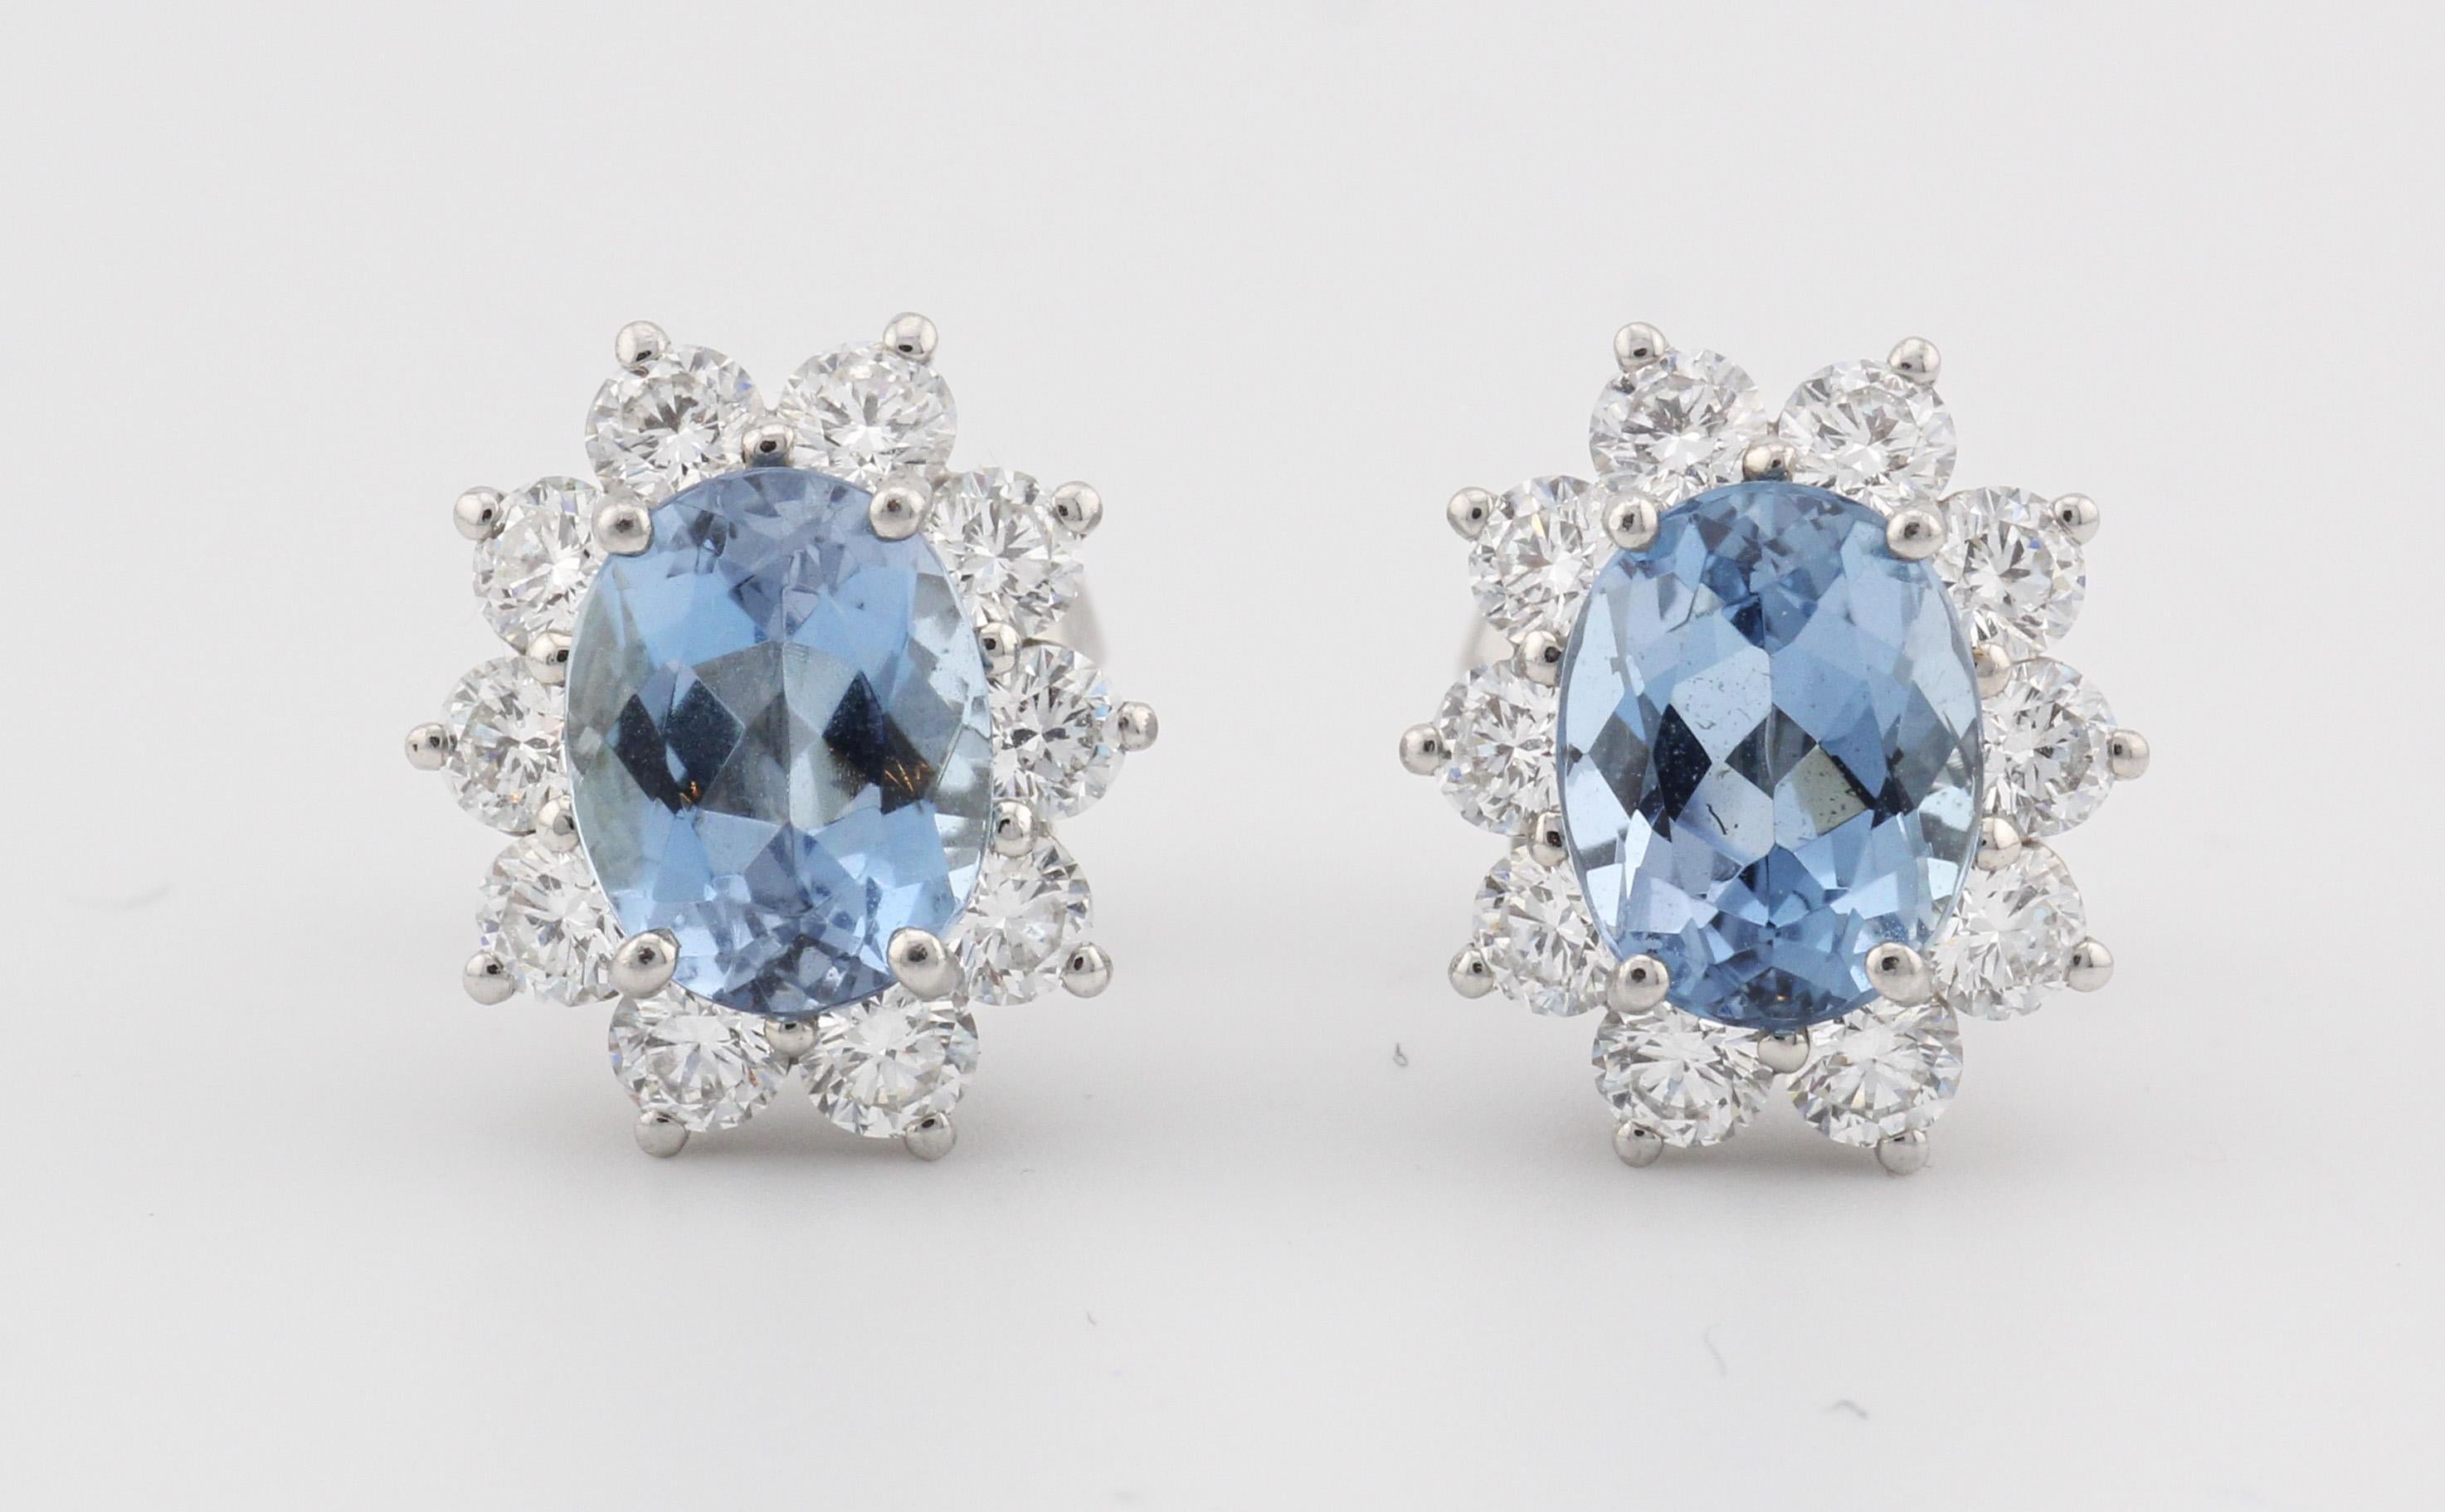 Tiffany & Co. Aquamarine Diamond Platinum Stud Earrings In Good Condition For Sale In Bellmore, NY